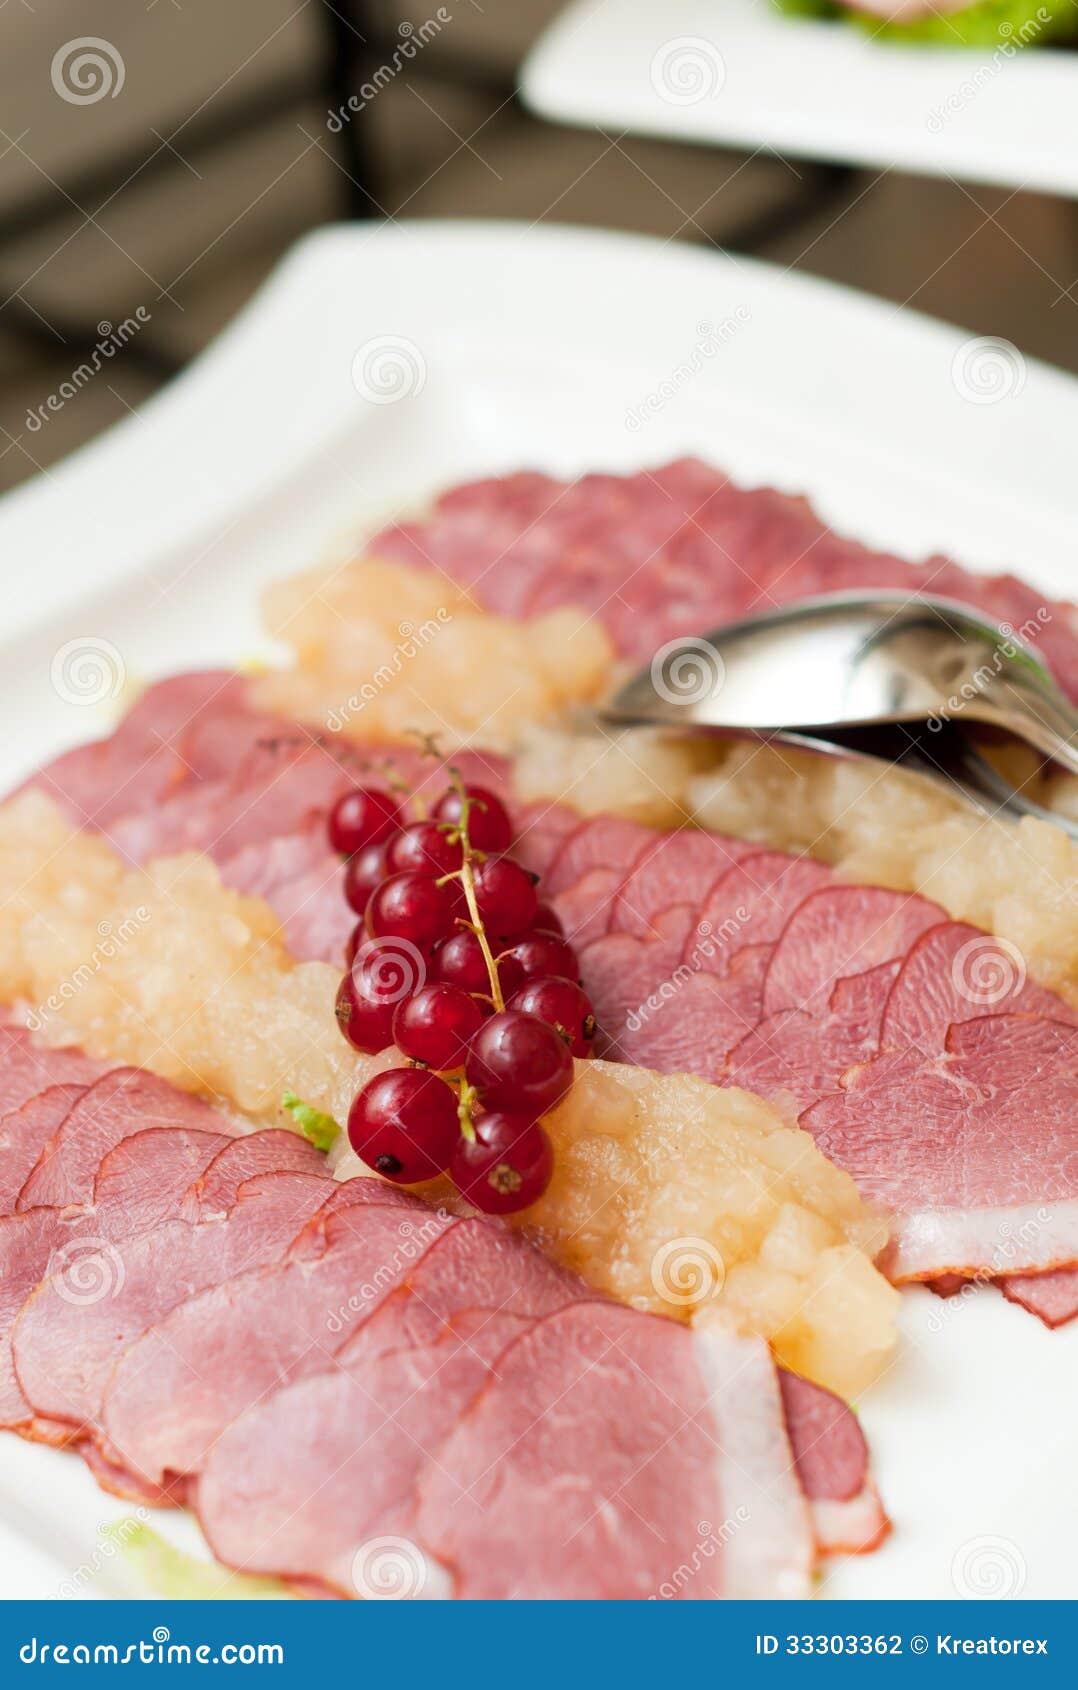 Traditional ham stock photo. Image of appetizer, hotel - 33303362